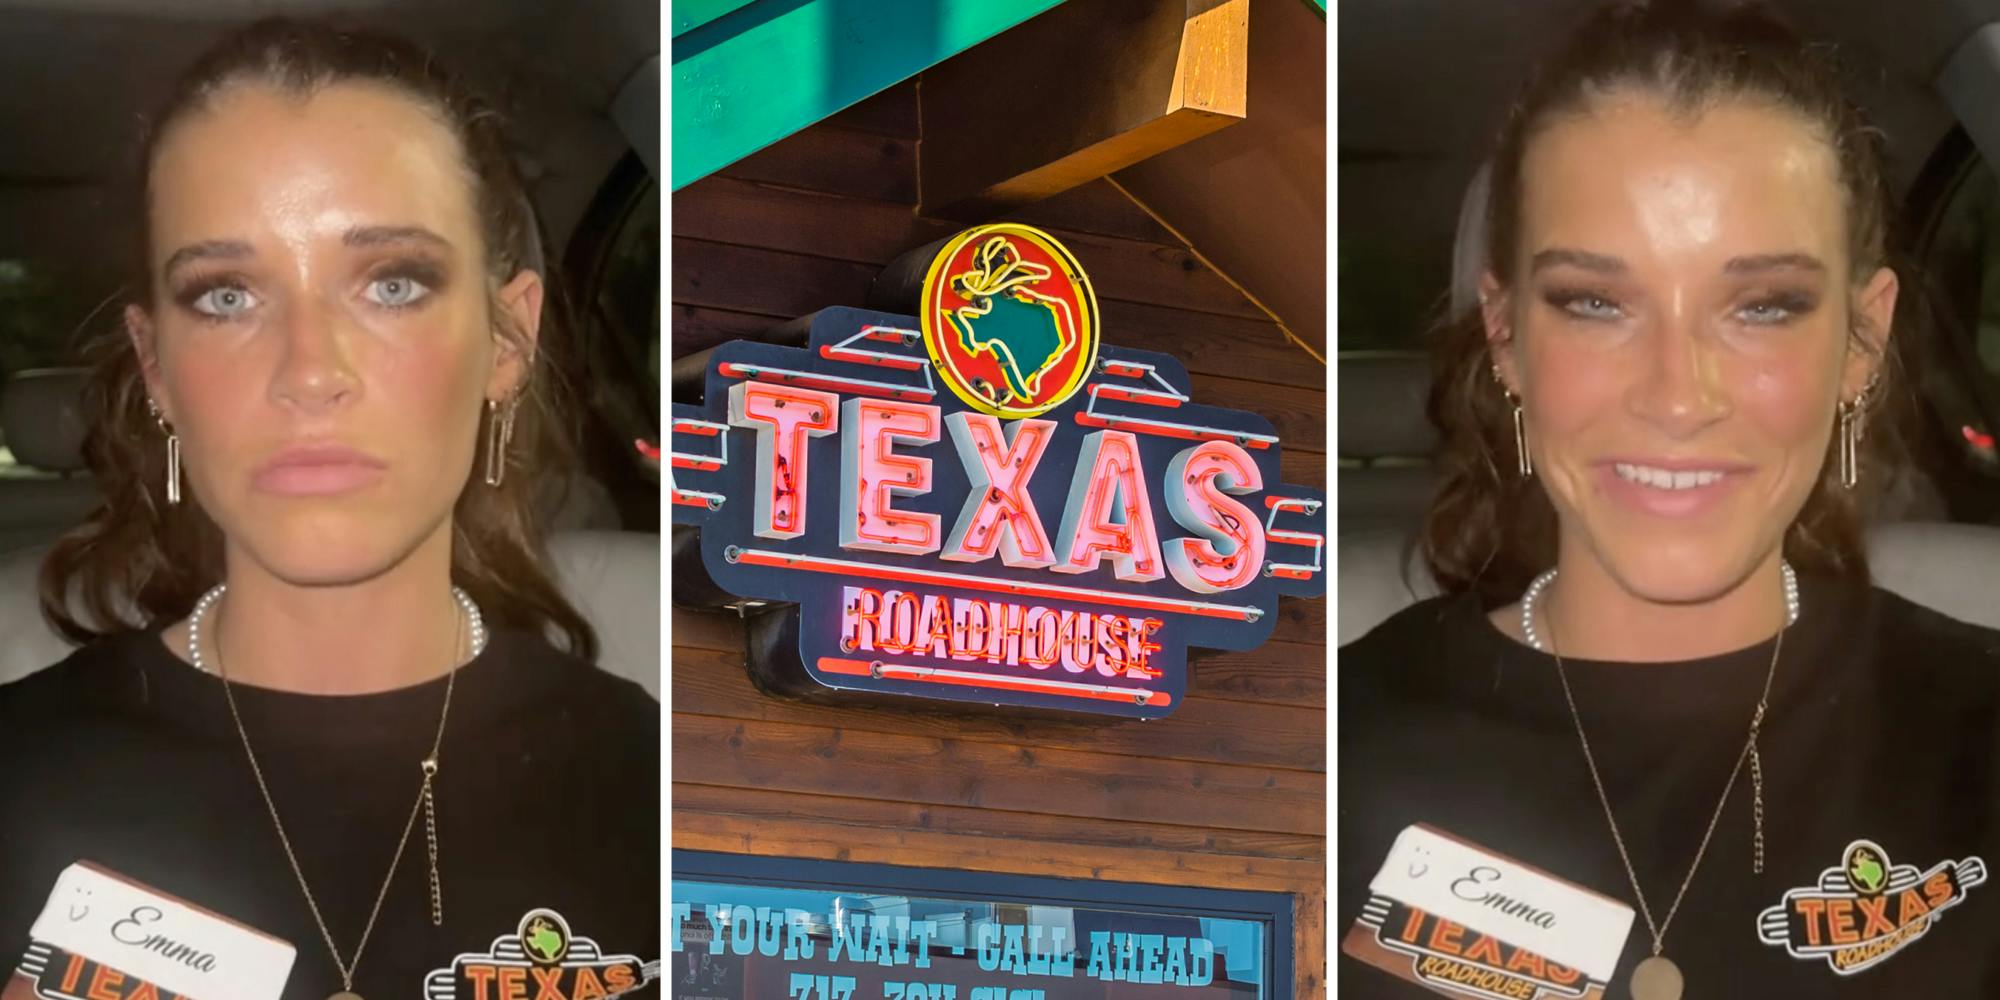 ‘Never in my 4 years of serving’: Texas Roadhouse customer says man walked out mid-meal after steak issues